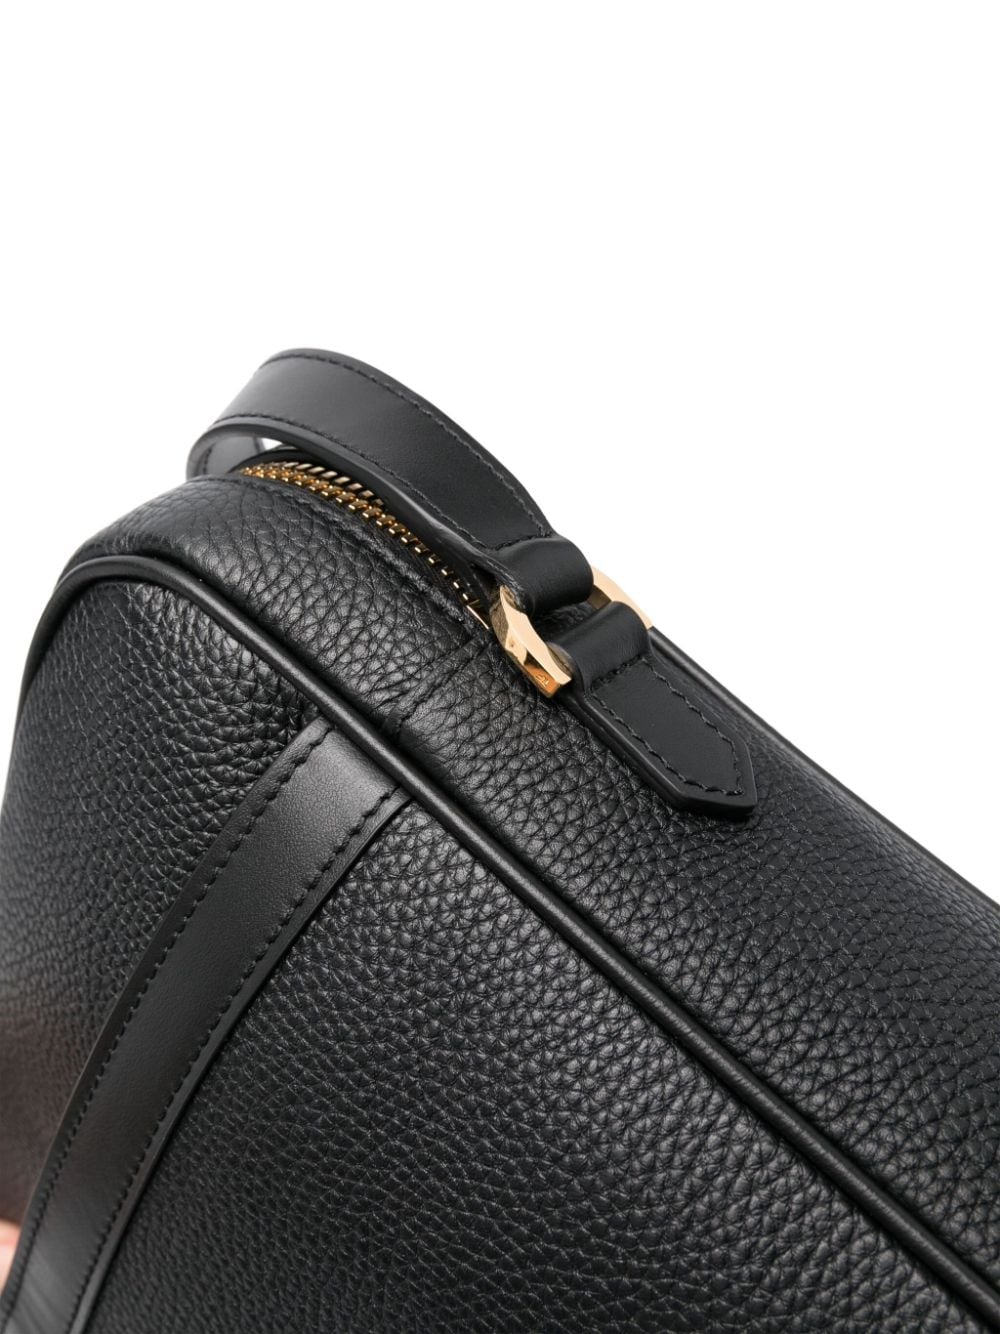 logo-patch leather briefcase - 3